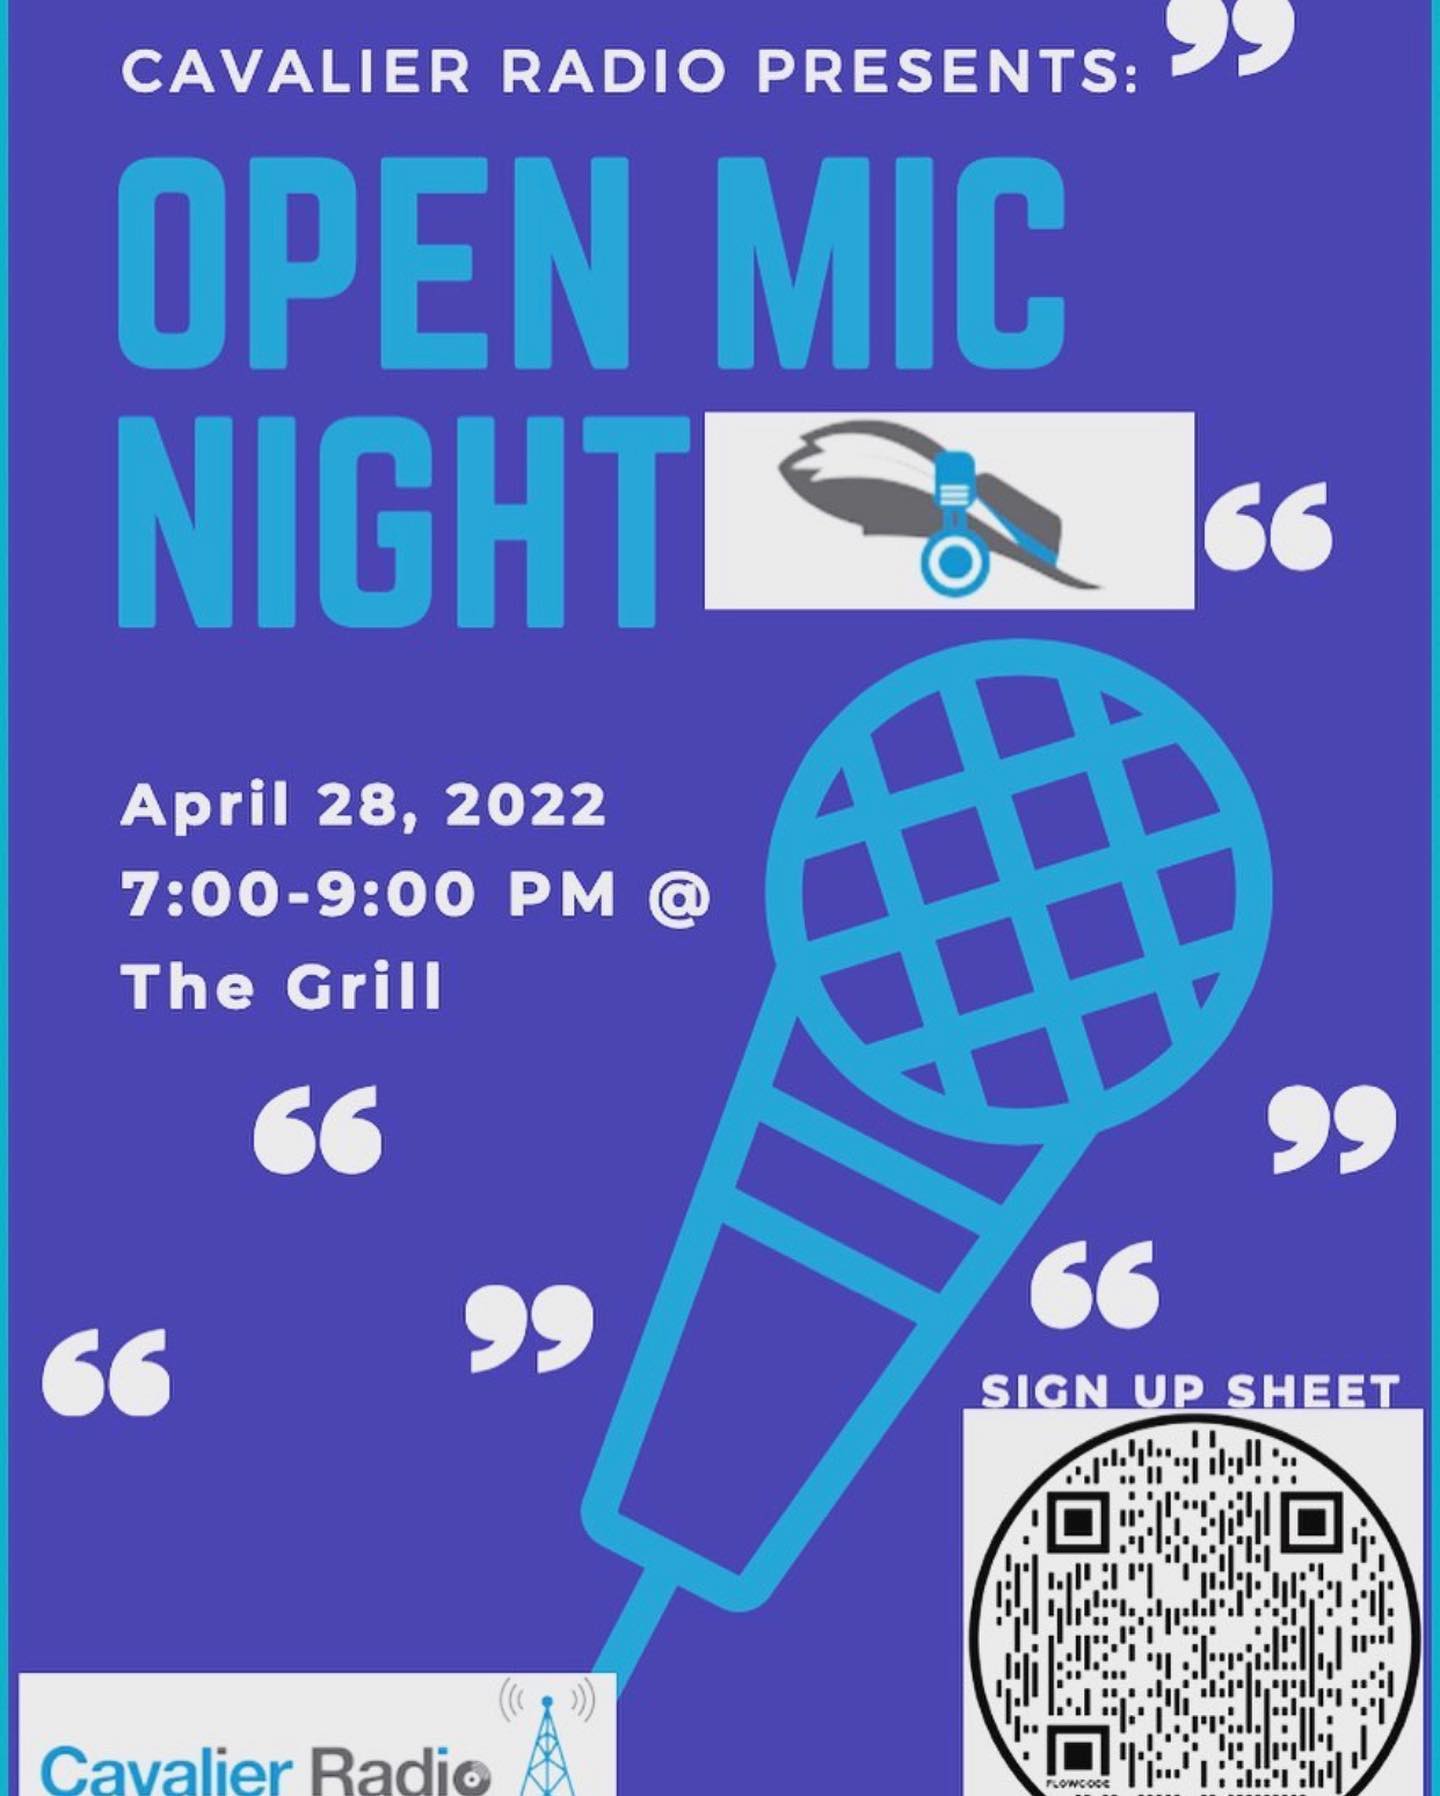 Wanna see some of your friends sing, rap or even do standup? Join @cavalierradio for their open mic night tonight @7pm in The grill. To learn more about it check out Mark Finley's story!
Link in bio